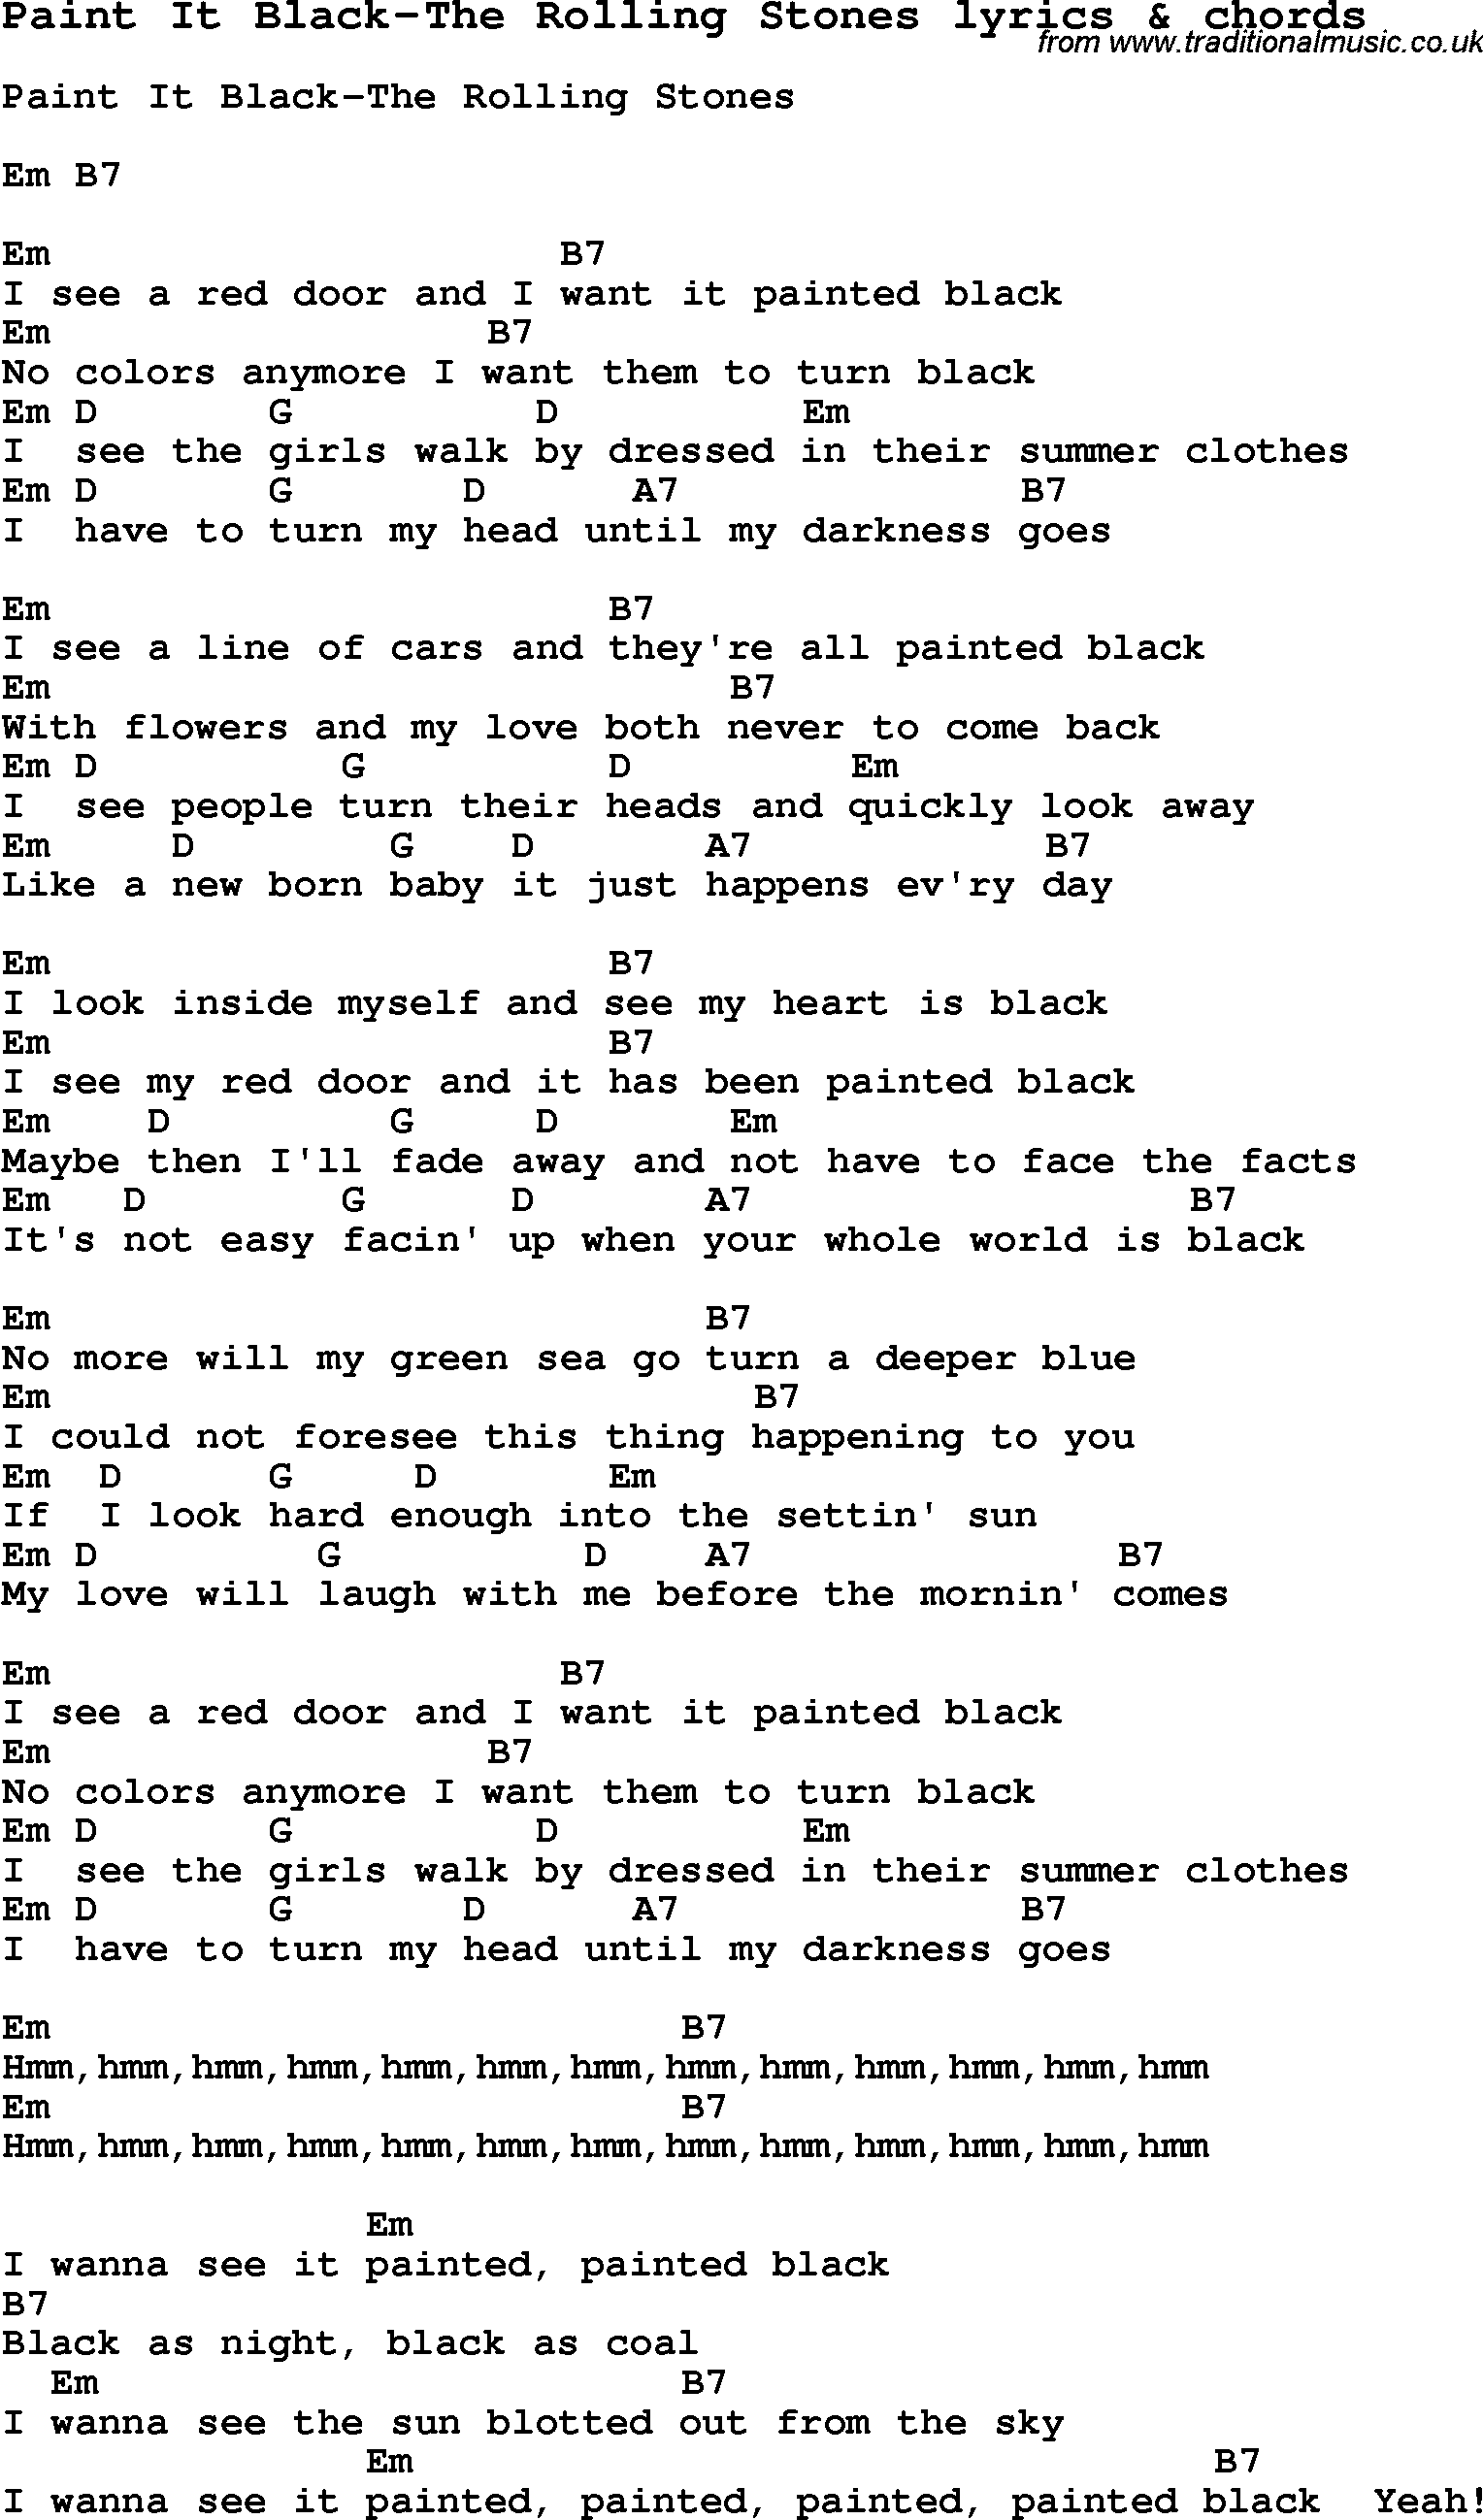 Love Song Lyrics for:Paint It Black-The Rolling Stones with chords.